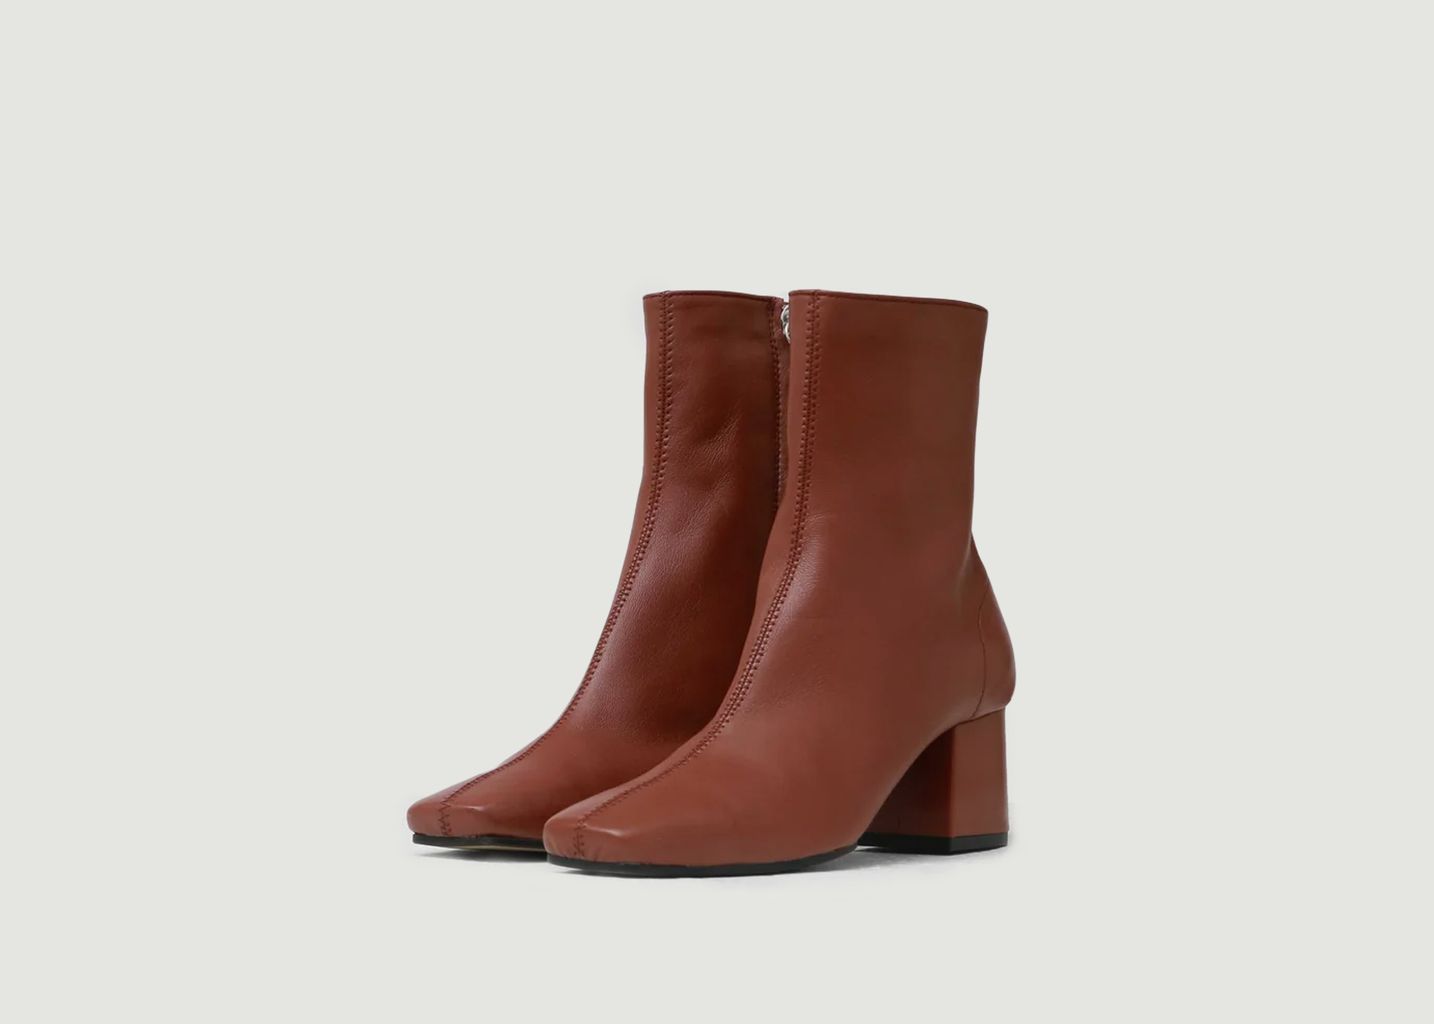 Soft Leather Ankle Boots - Tierra - Souliers Martinez